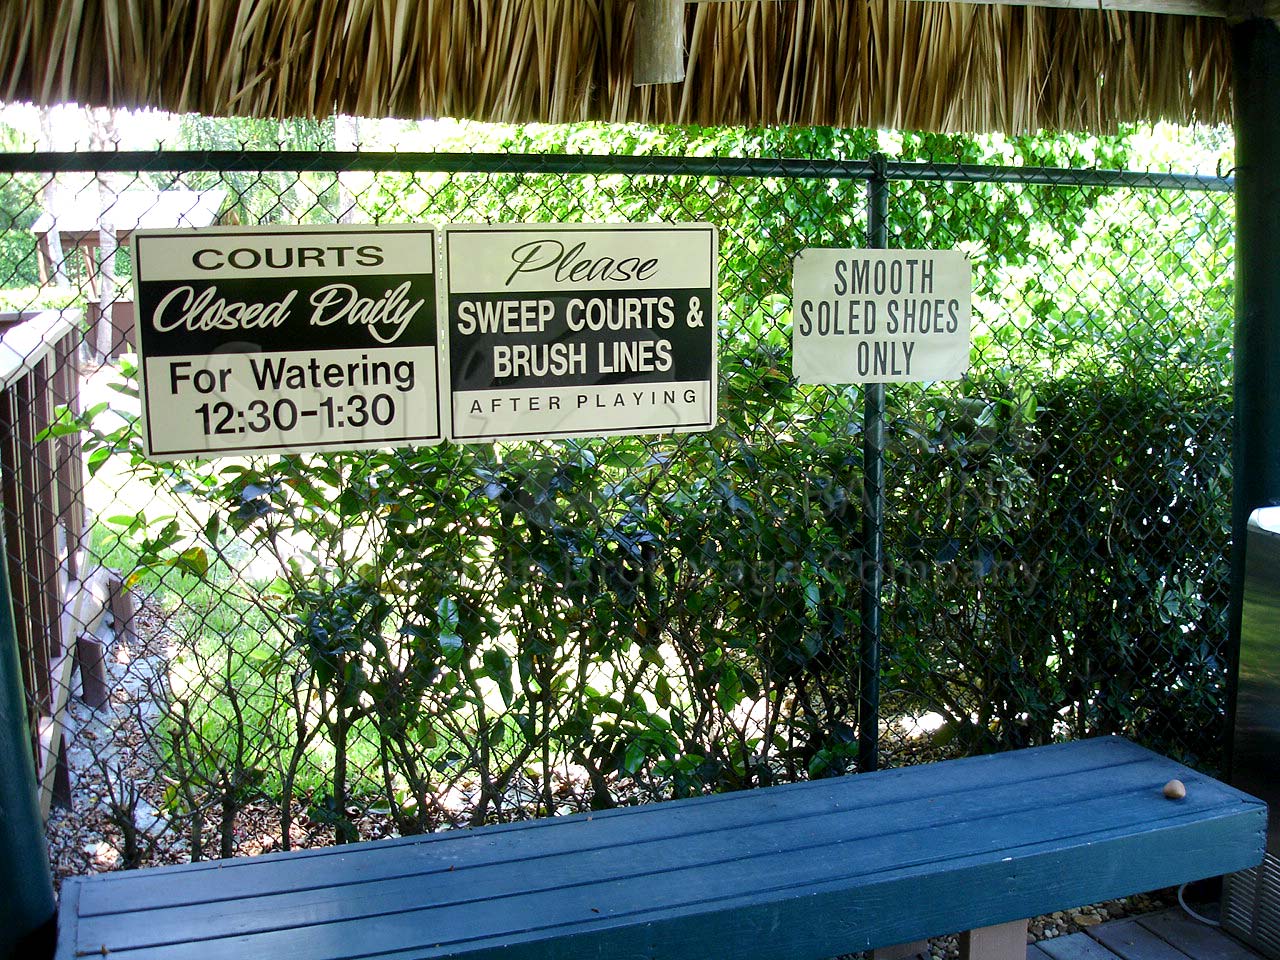 BAY FOREST Tennis Courts